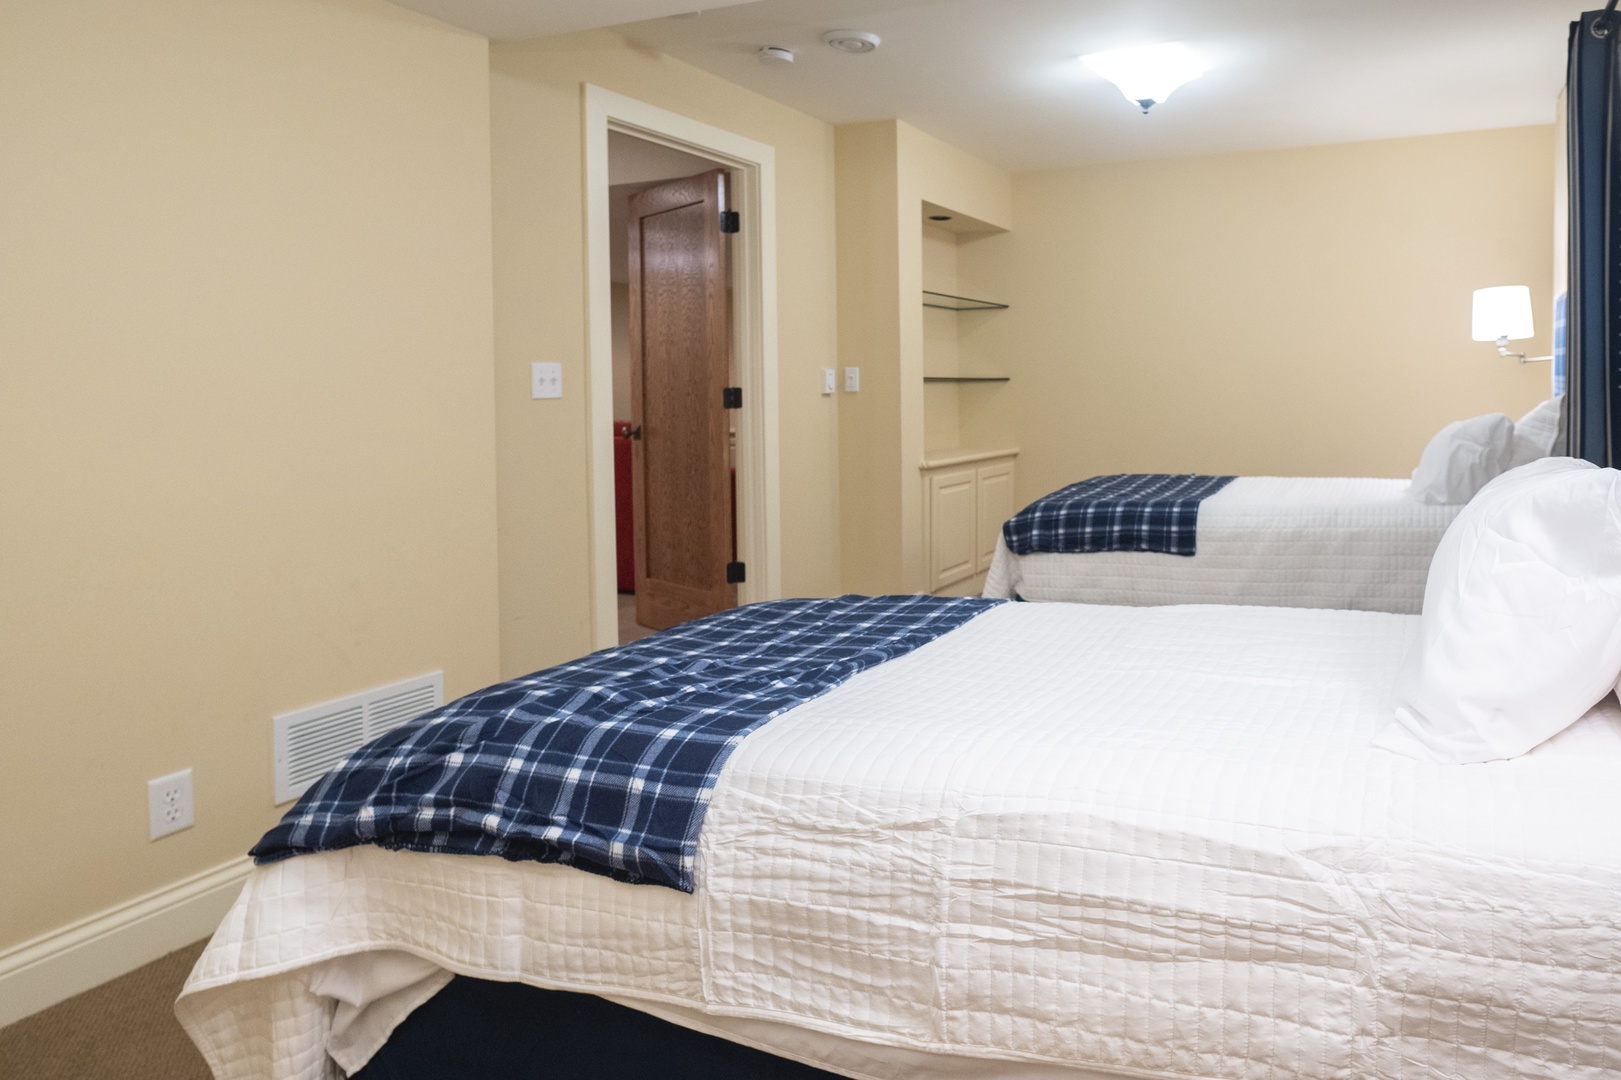 A pair of comfortable twin beds is available in the lower-level bedroom